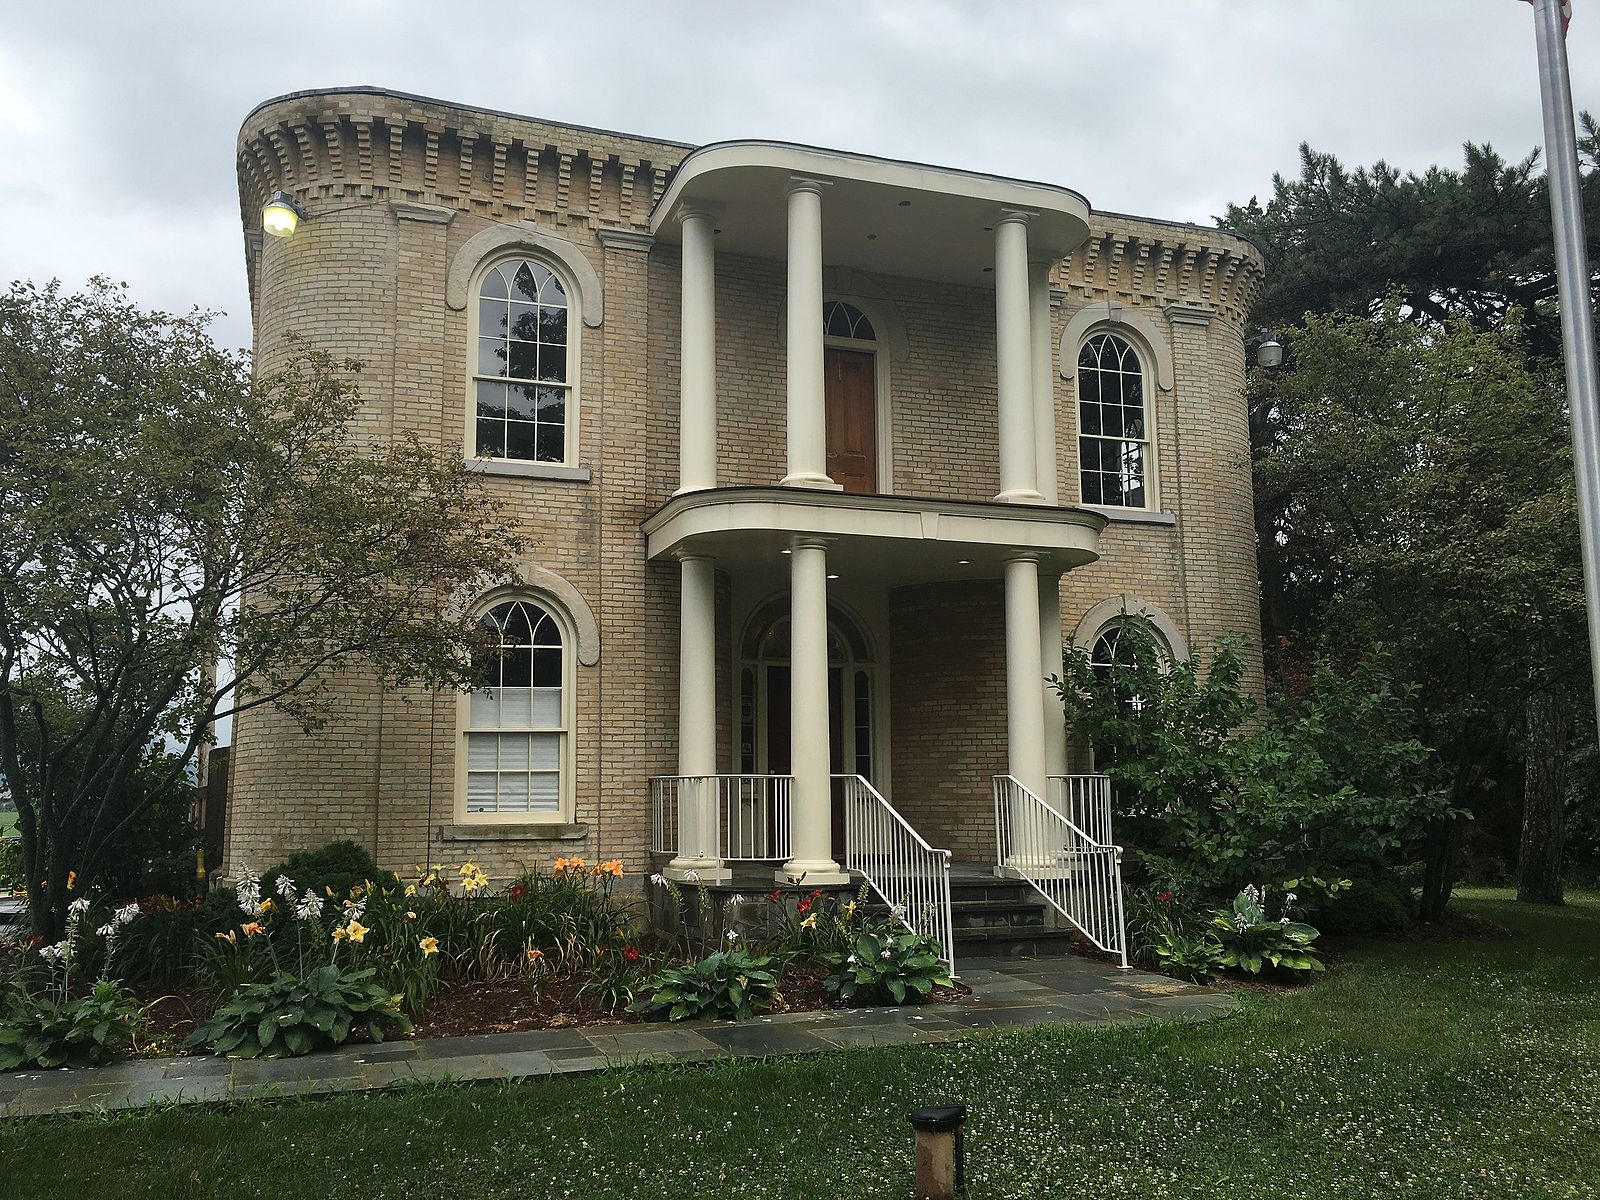 George Stickney House in Bull Valley, Illinois